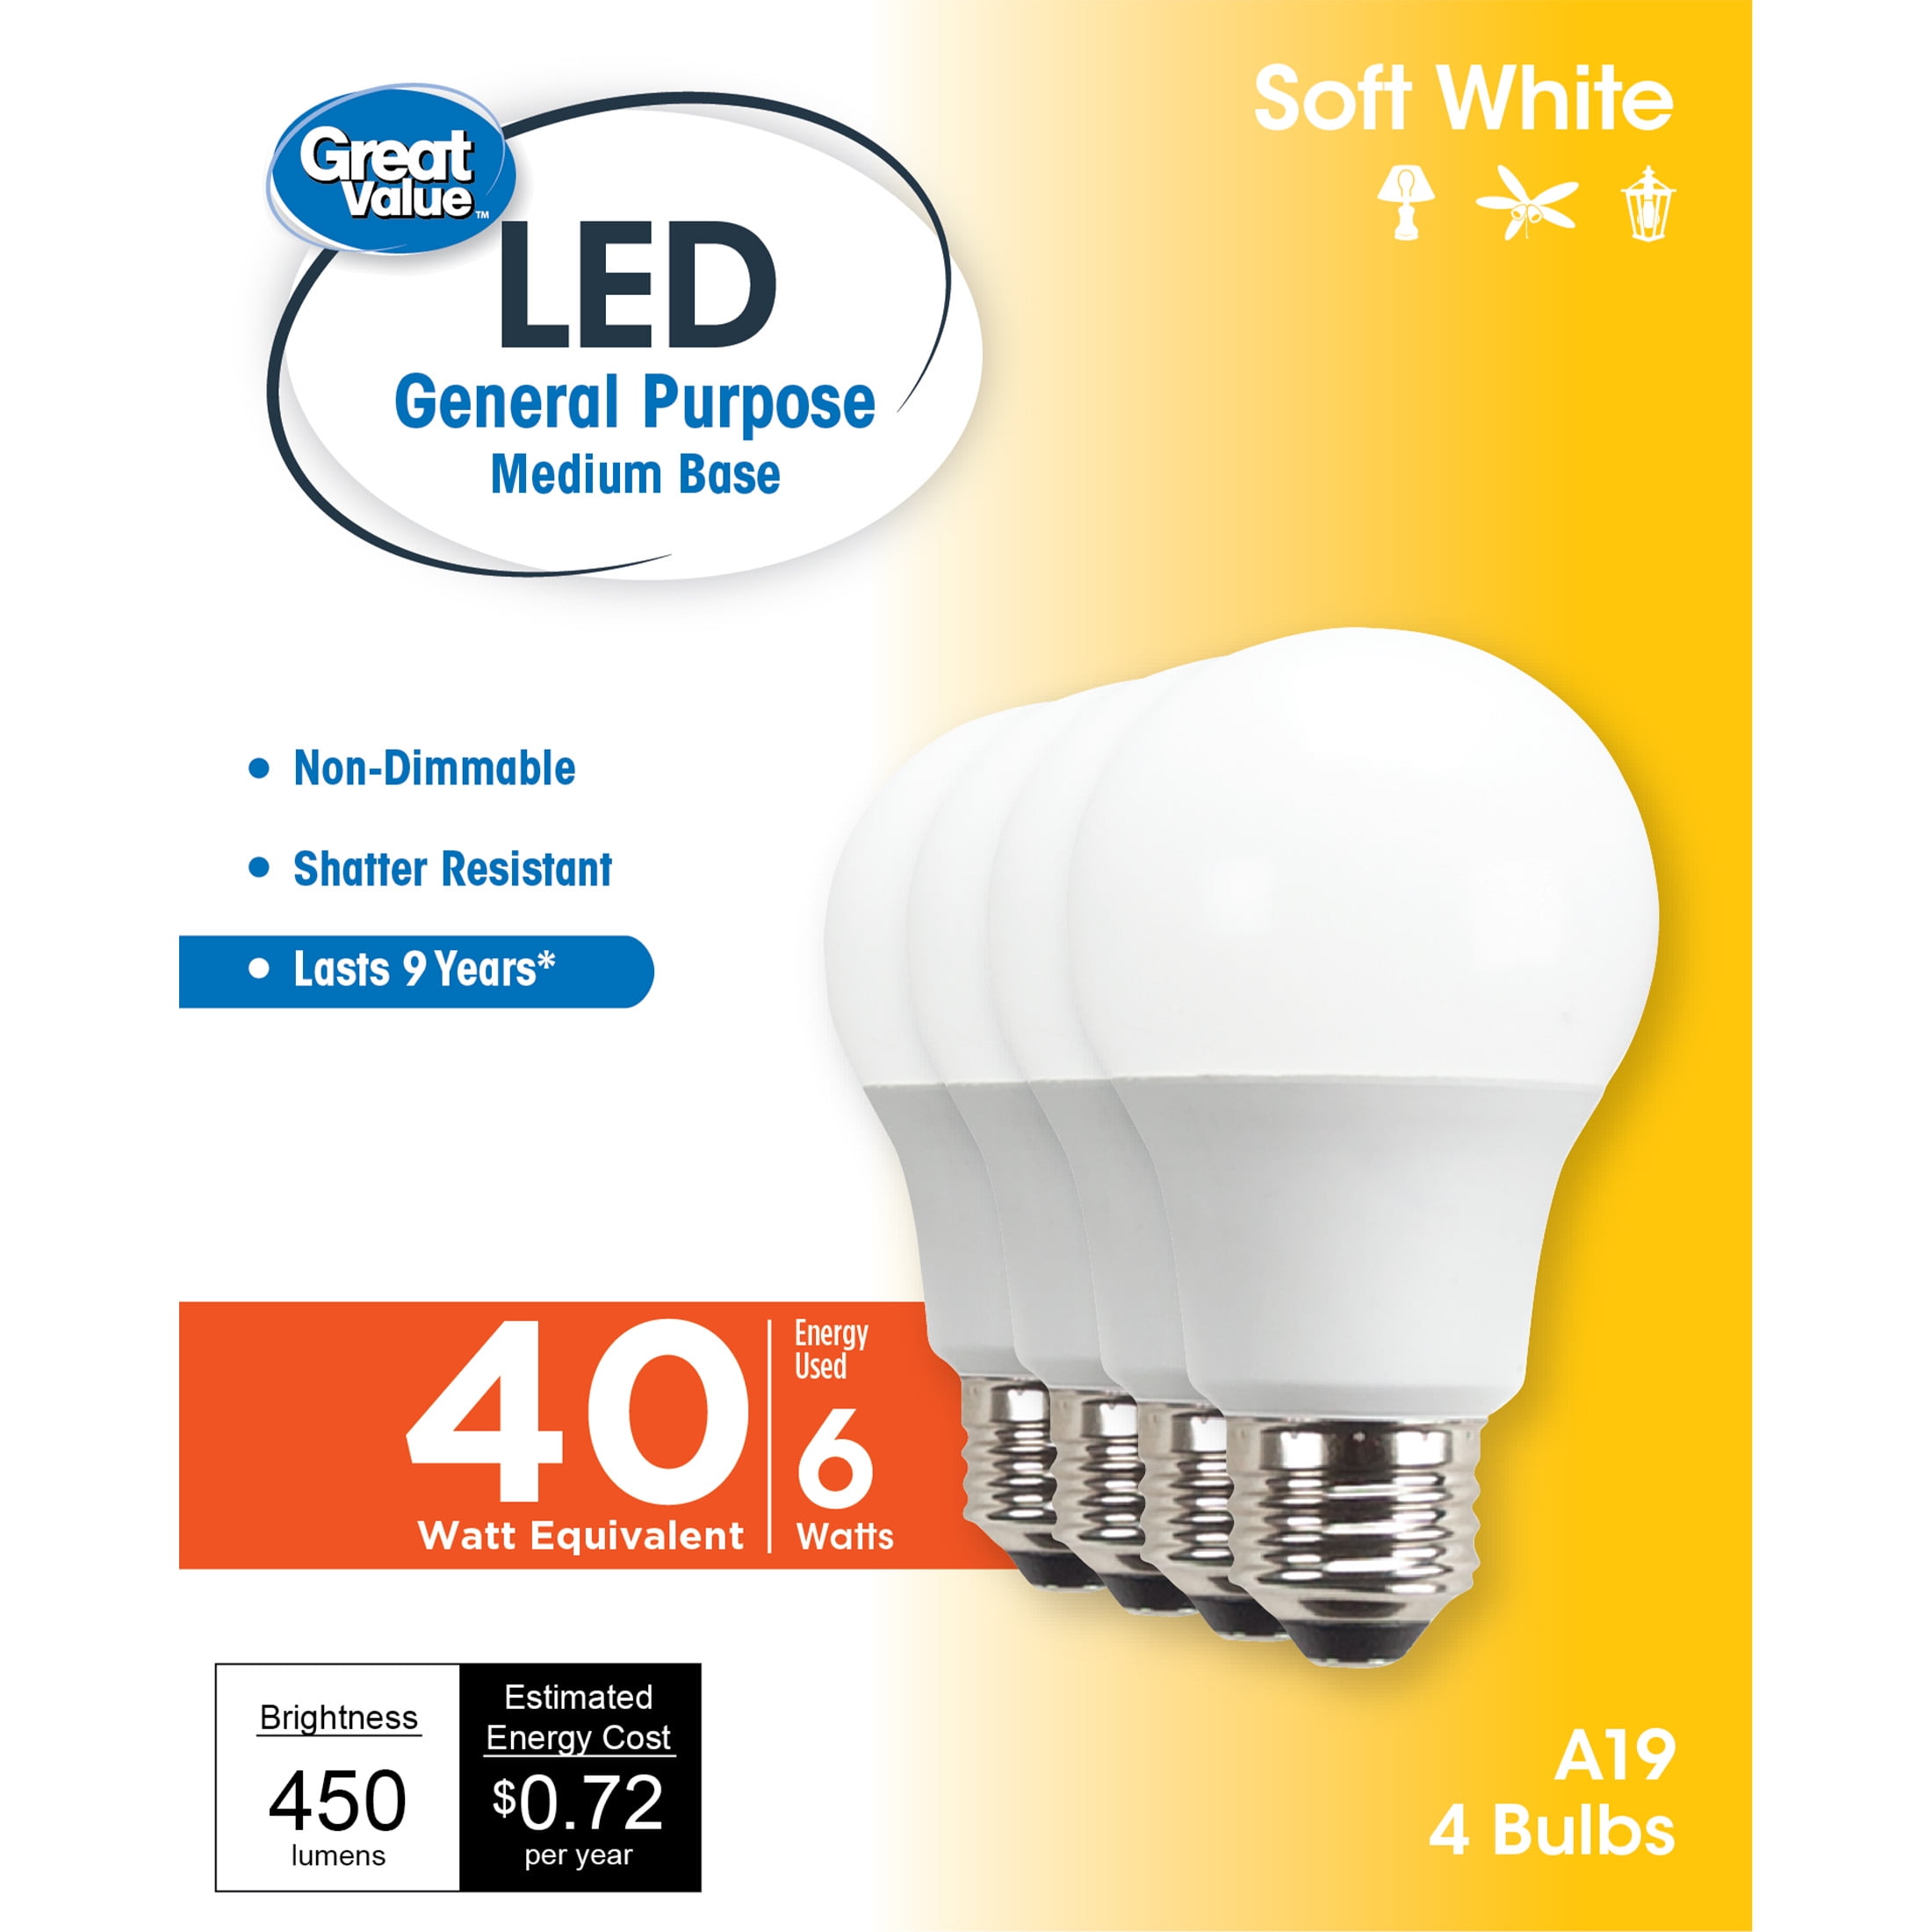 Great Value LED Light Bulb, 6W (40W Equivalent) A19 General Purpose Lamp E26 Medium Base, Non-dimmable, Soft White, 4-Pack